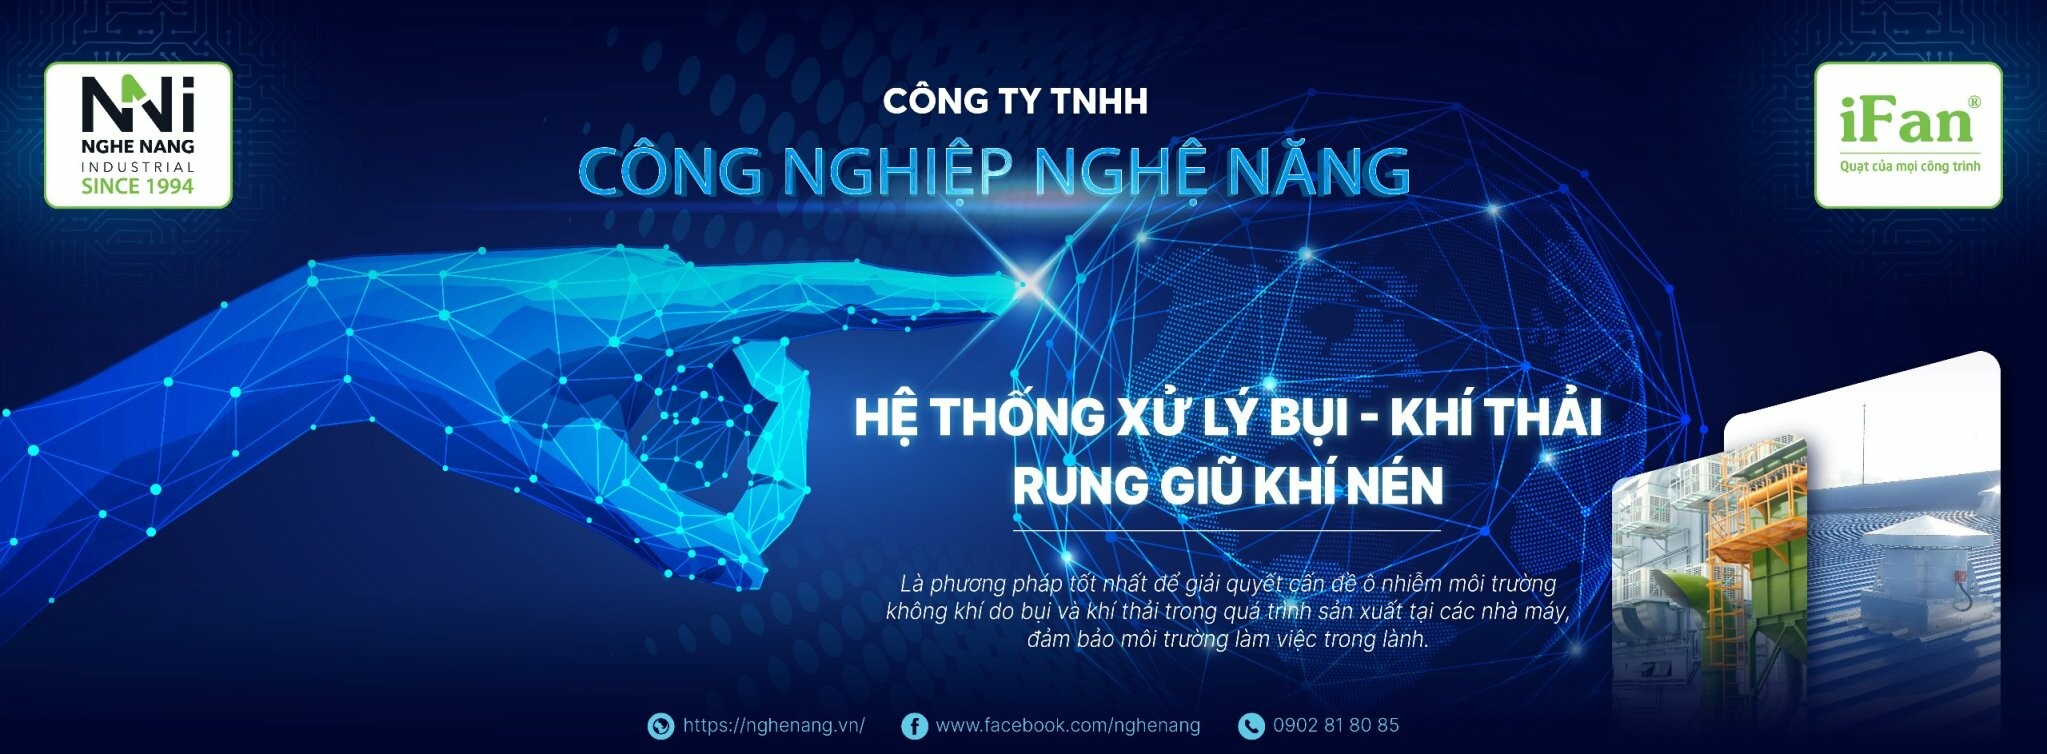 Cover image for Nghệ Năng